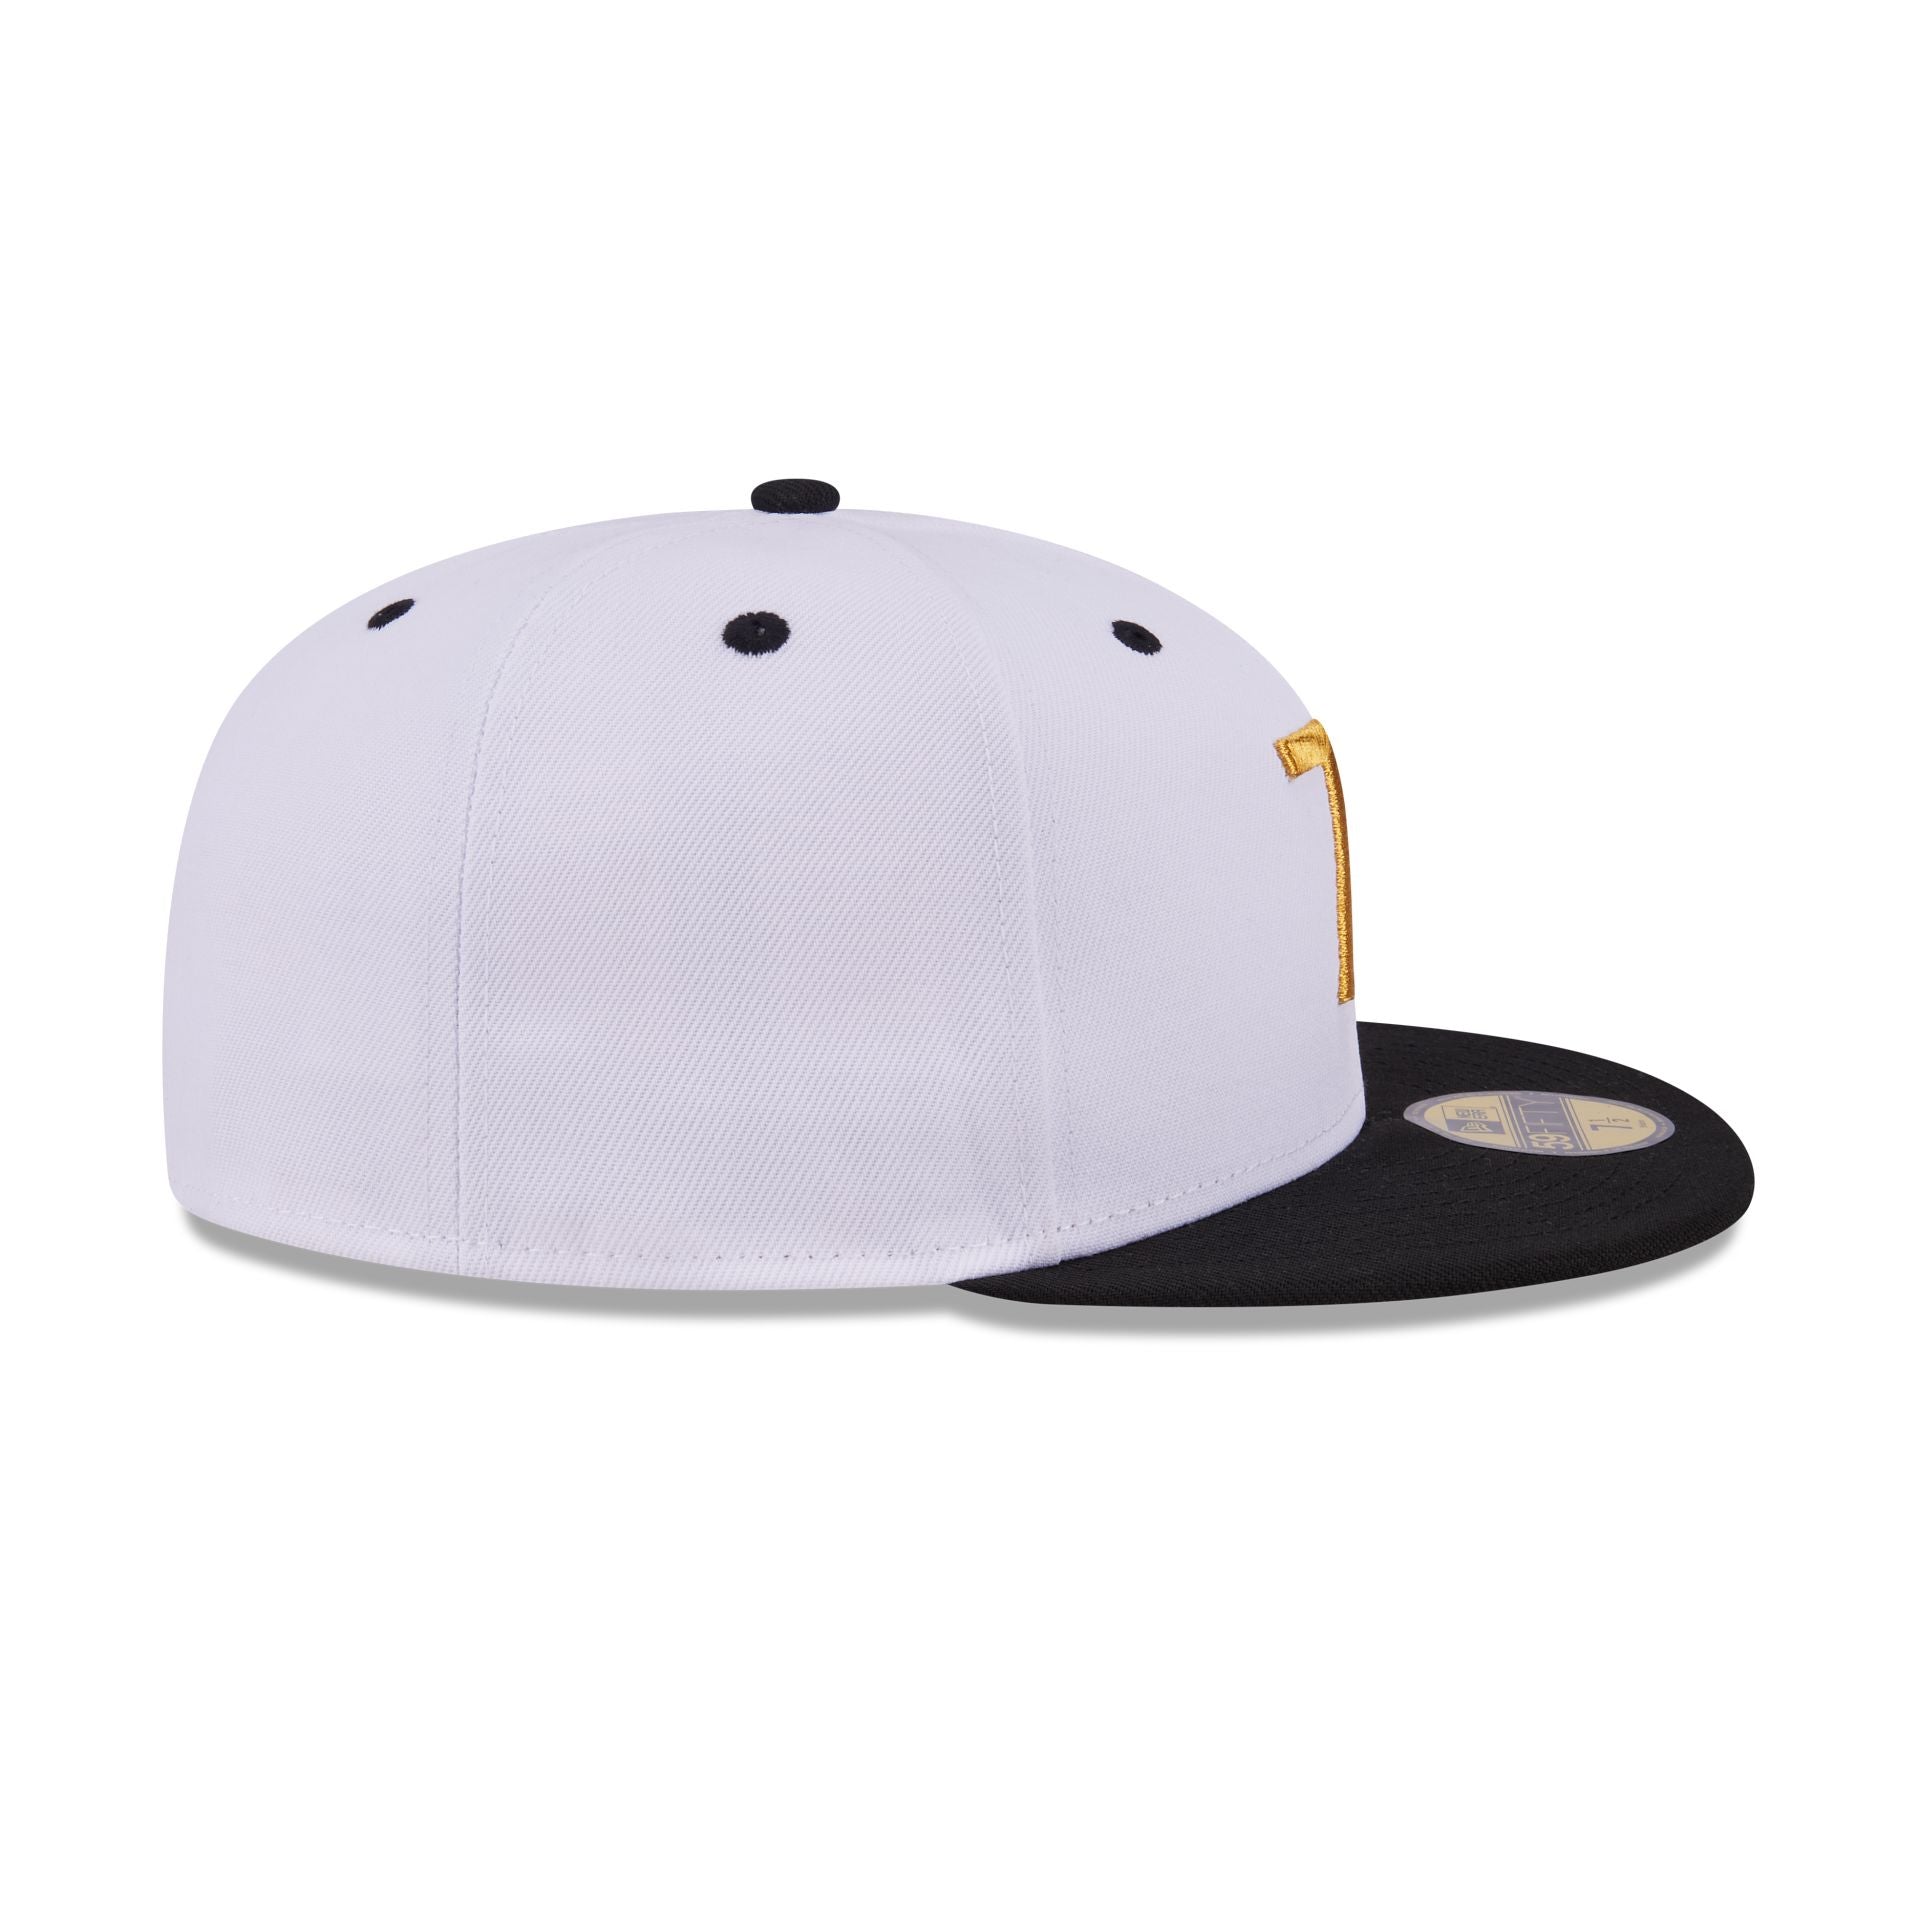 New Era Cap Signature Size 7 1/8 White 59FIFTY Fitted